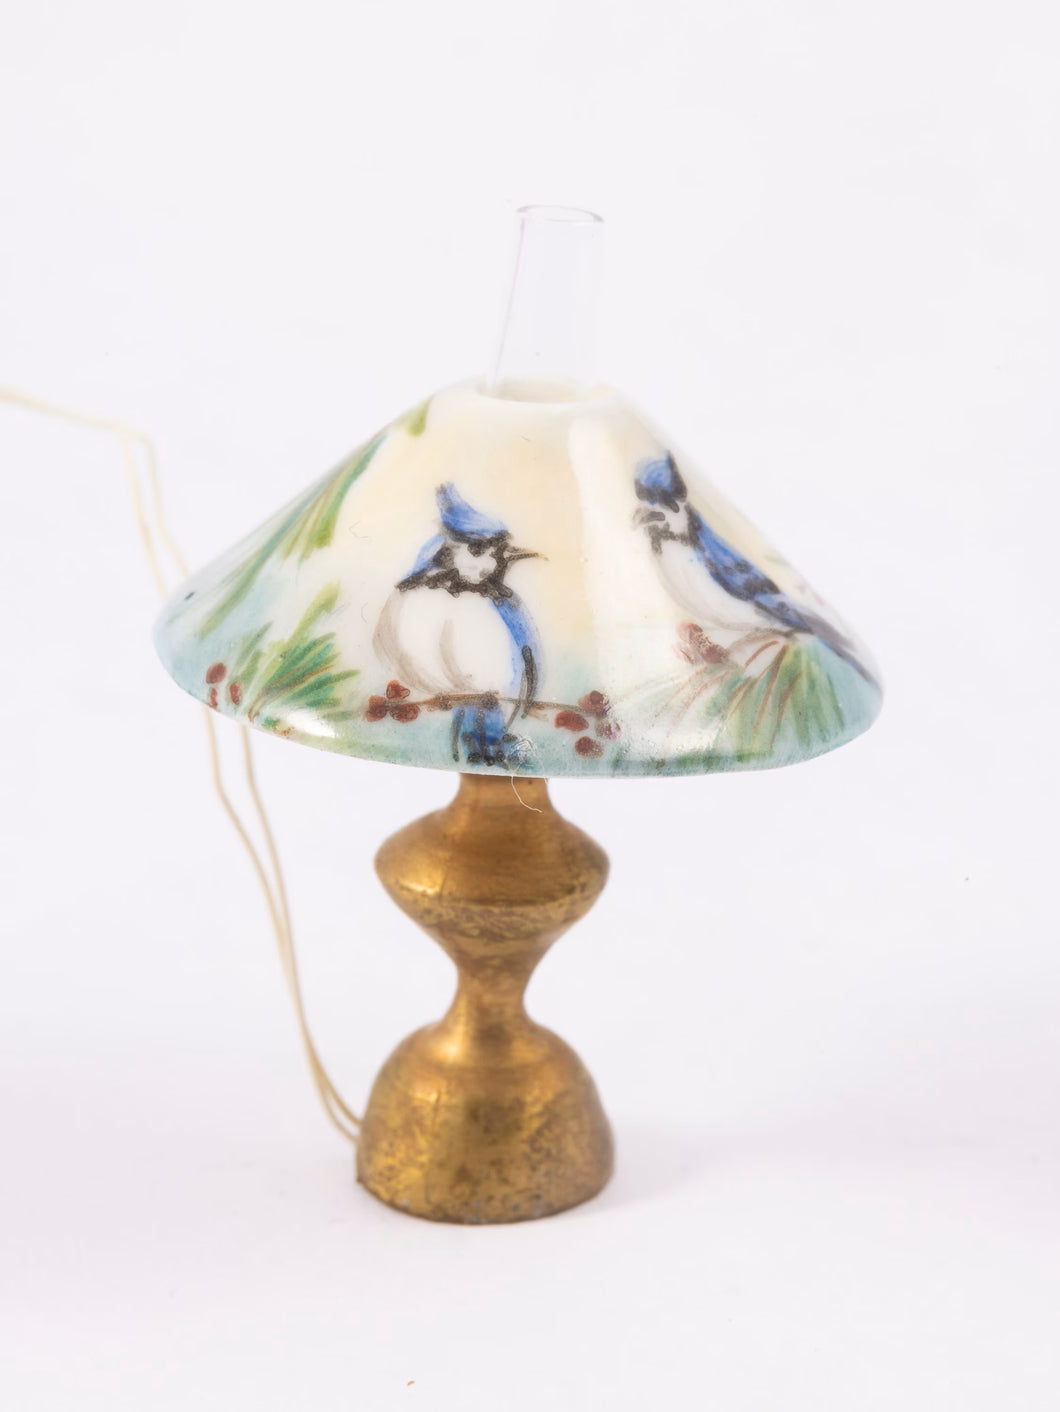 NiGlo (Nicole Minnick) Porcelain Lamp with Hand Painted Blue Jay